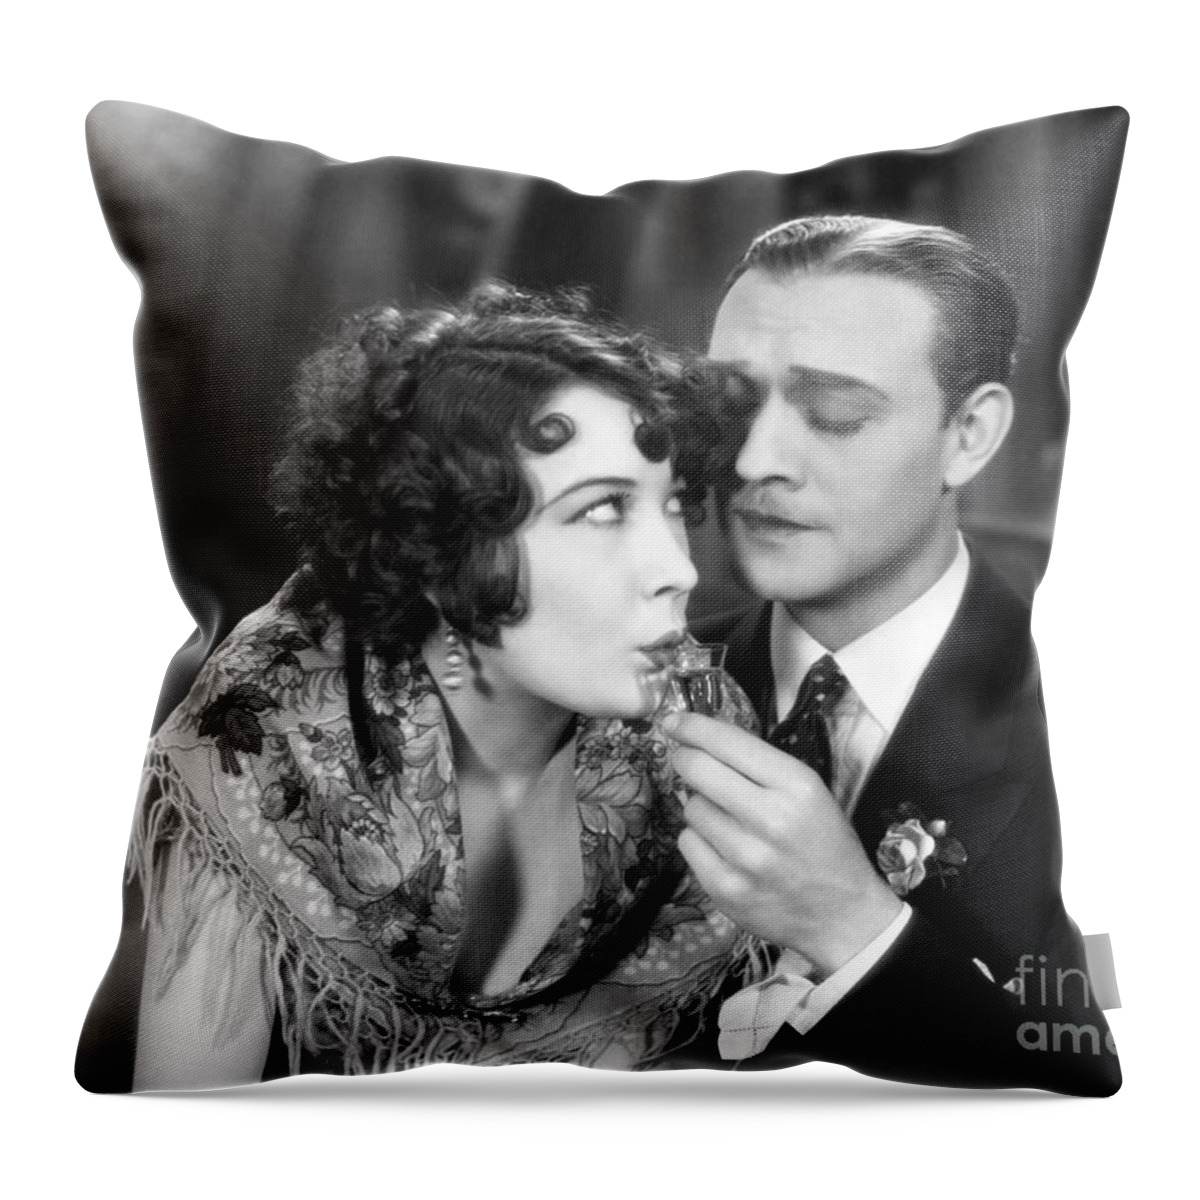 -drinking- Throw Pillow featuring the photograph Silent Film Still: Drinking by Granger